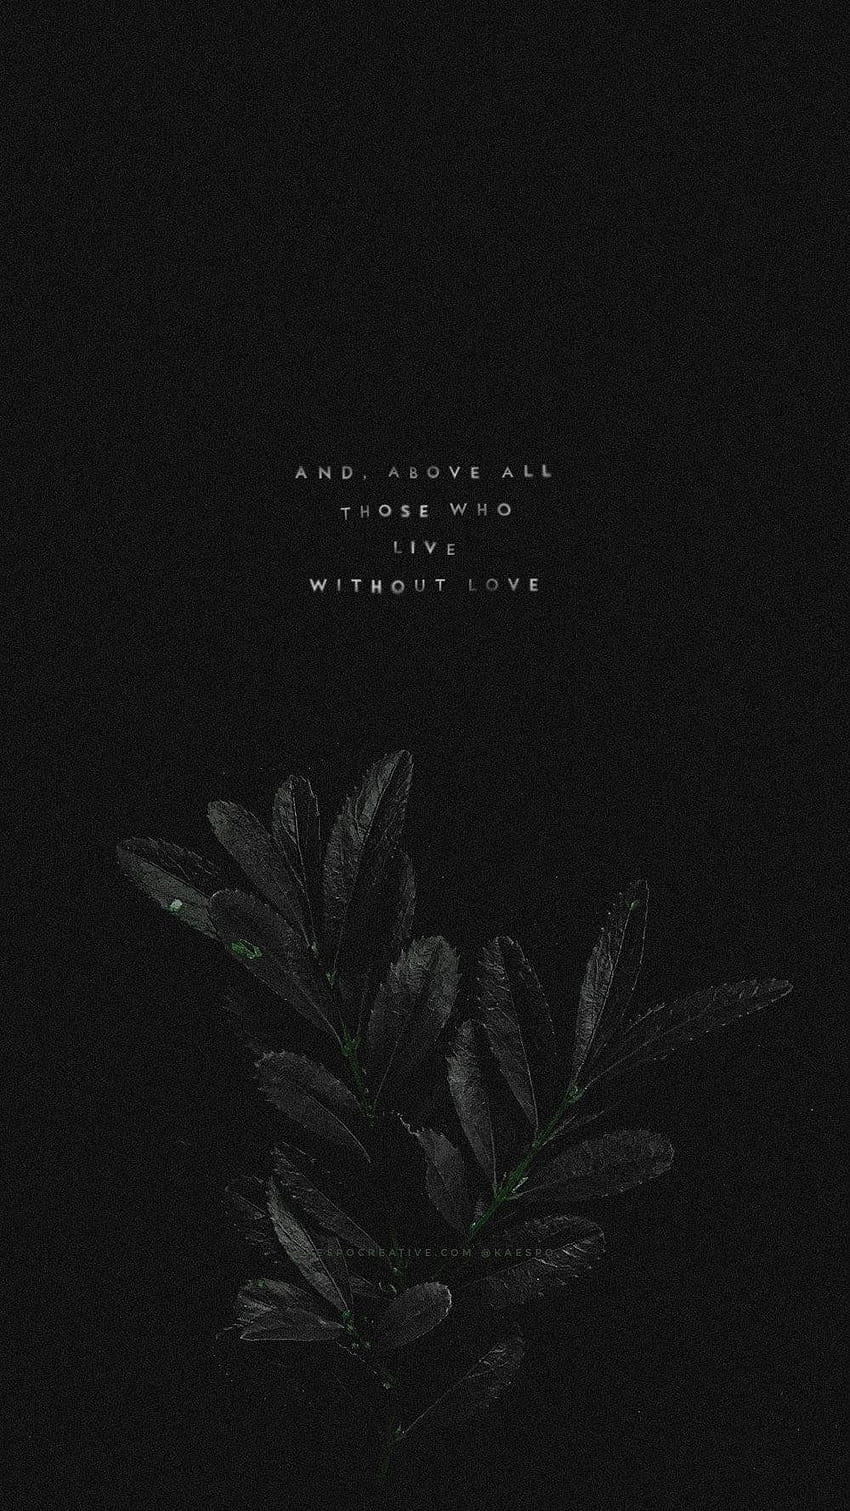 Aesthetic phone wallpaper with a quote from 1 Corinthians 13:13 and a plant illustration. - Dark phone